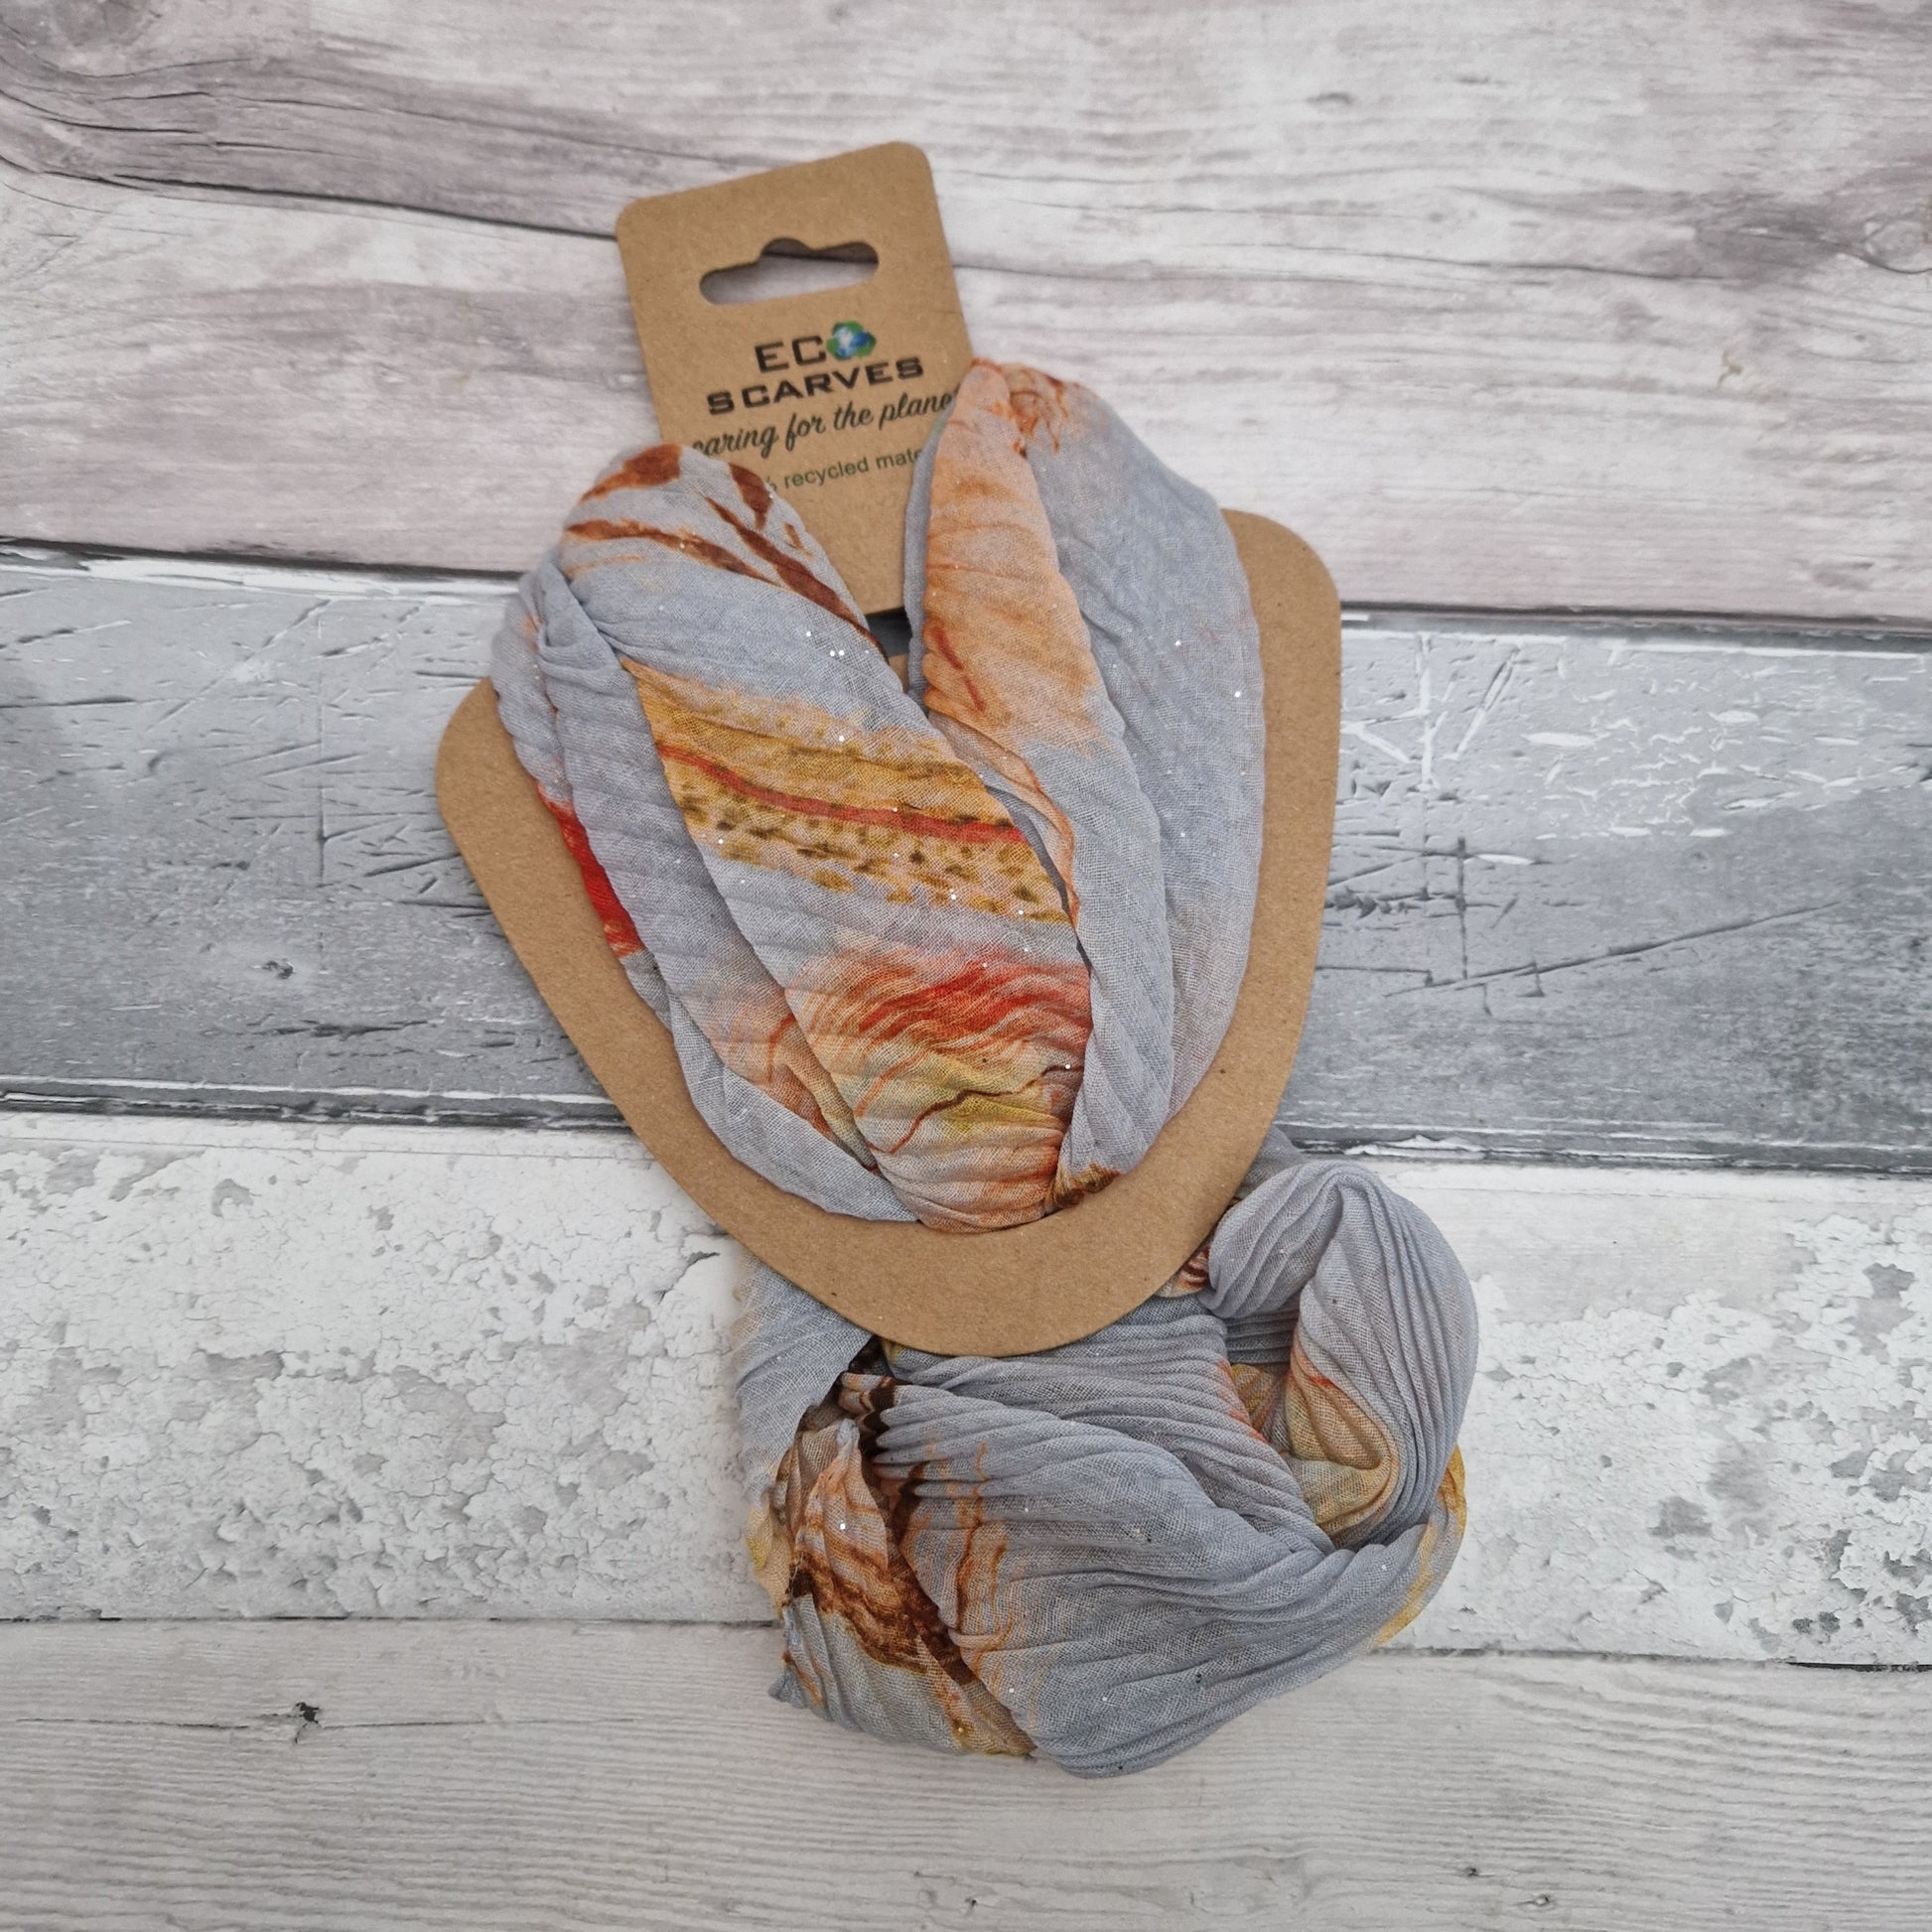 Magnetic neck scarf in grey with orange feather print